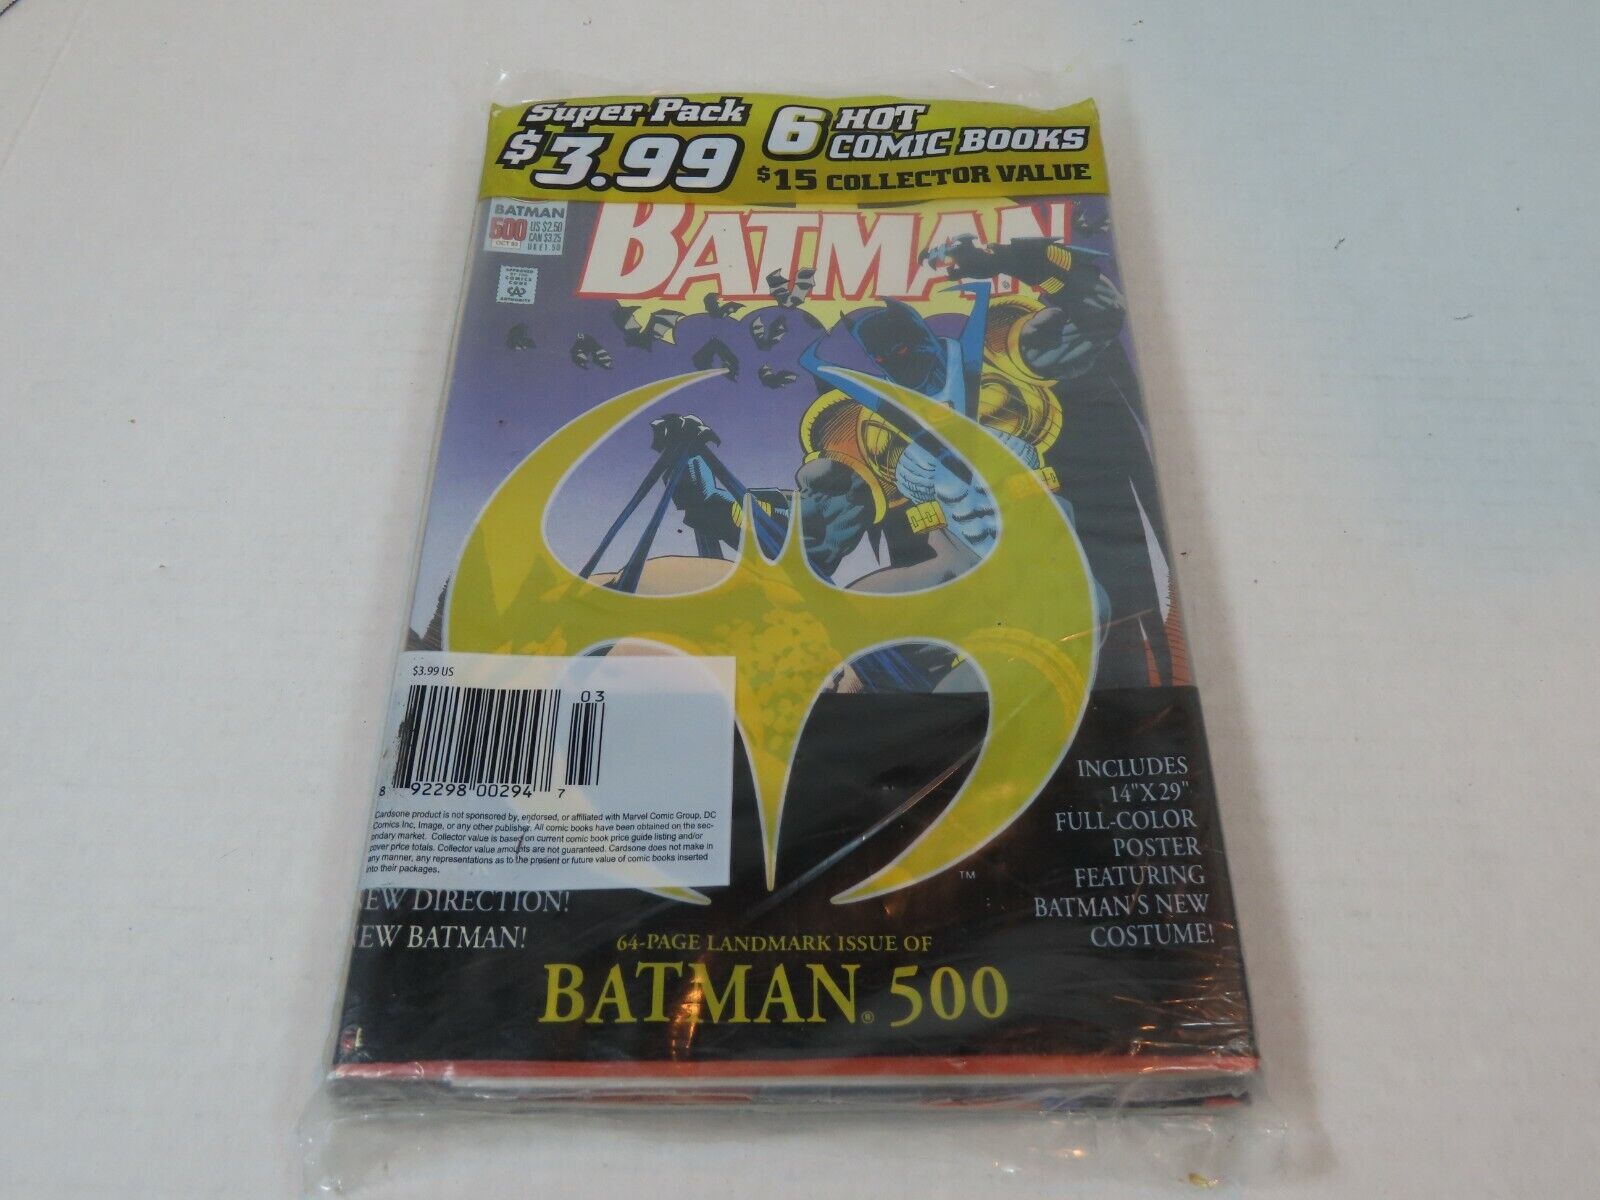 Comic Book Super Pack 6 Issues Batman 500 With Poster, Cardsone New Sealed